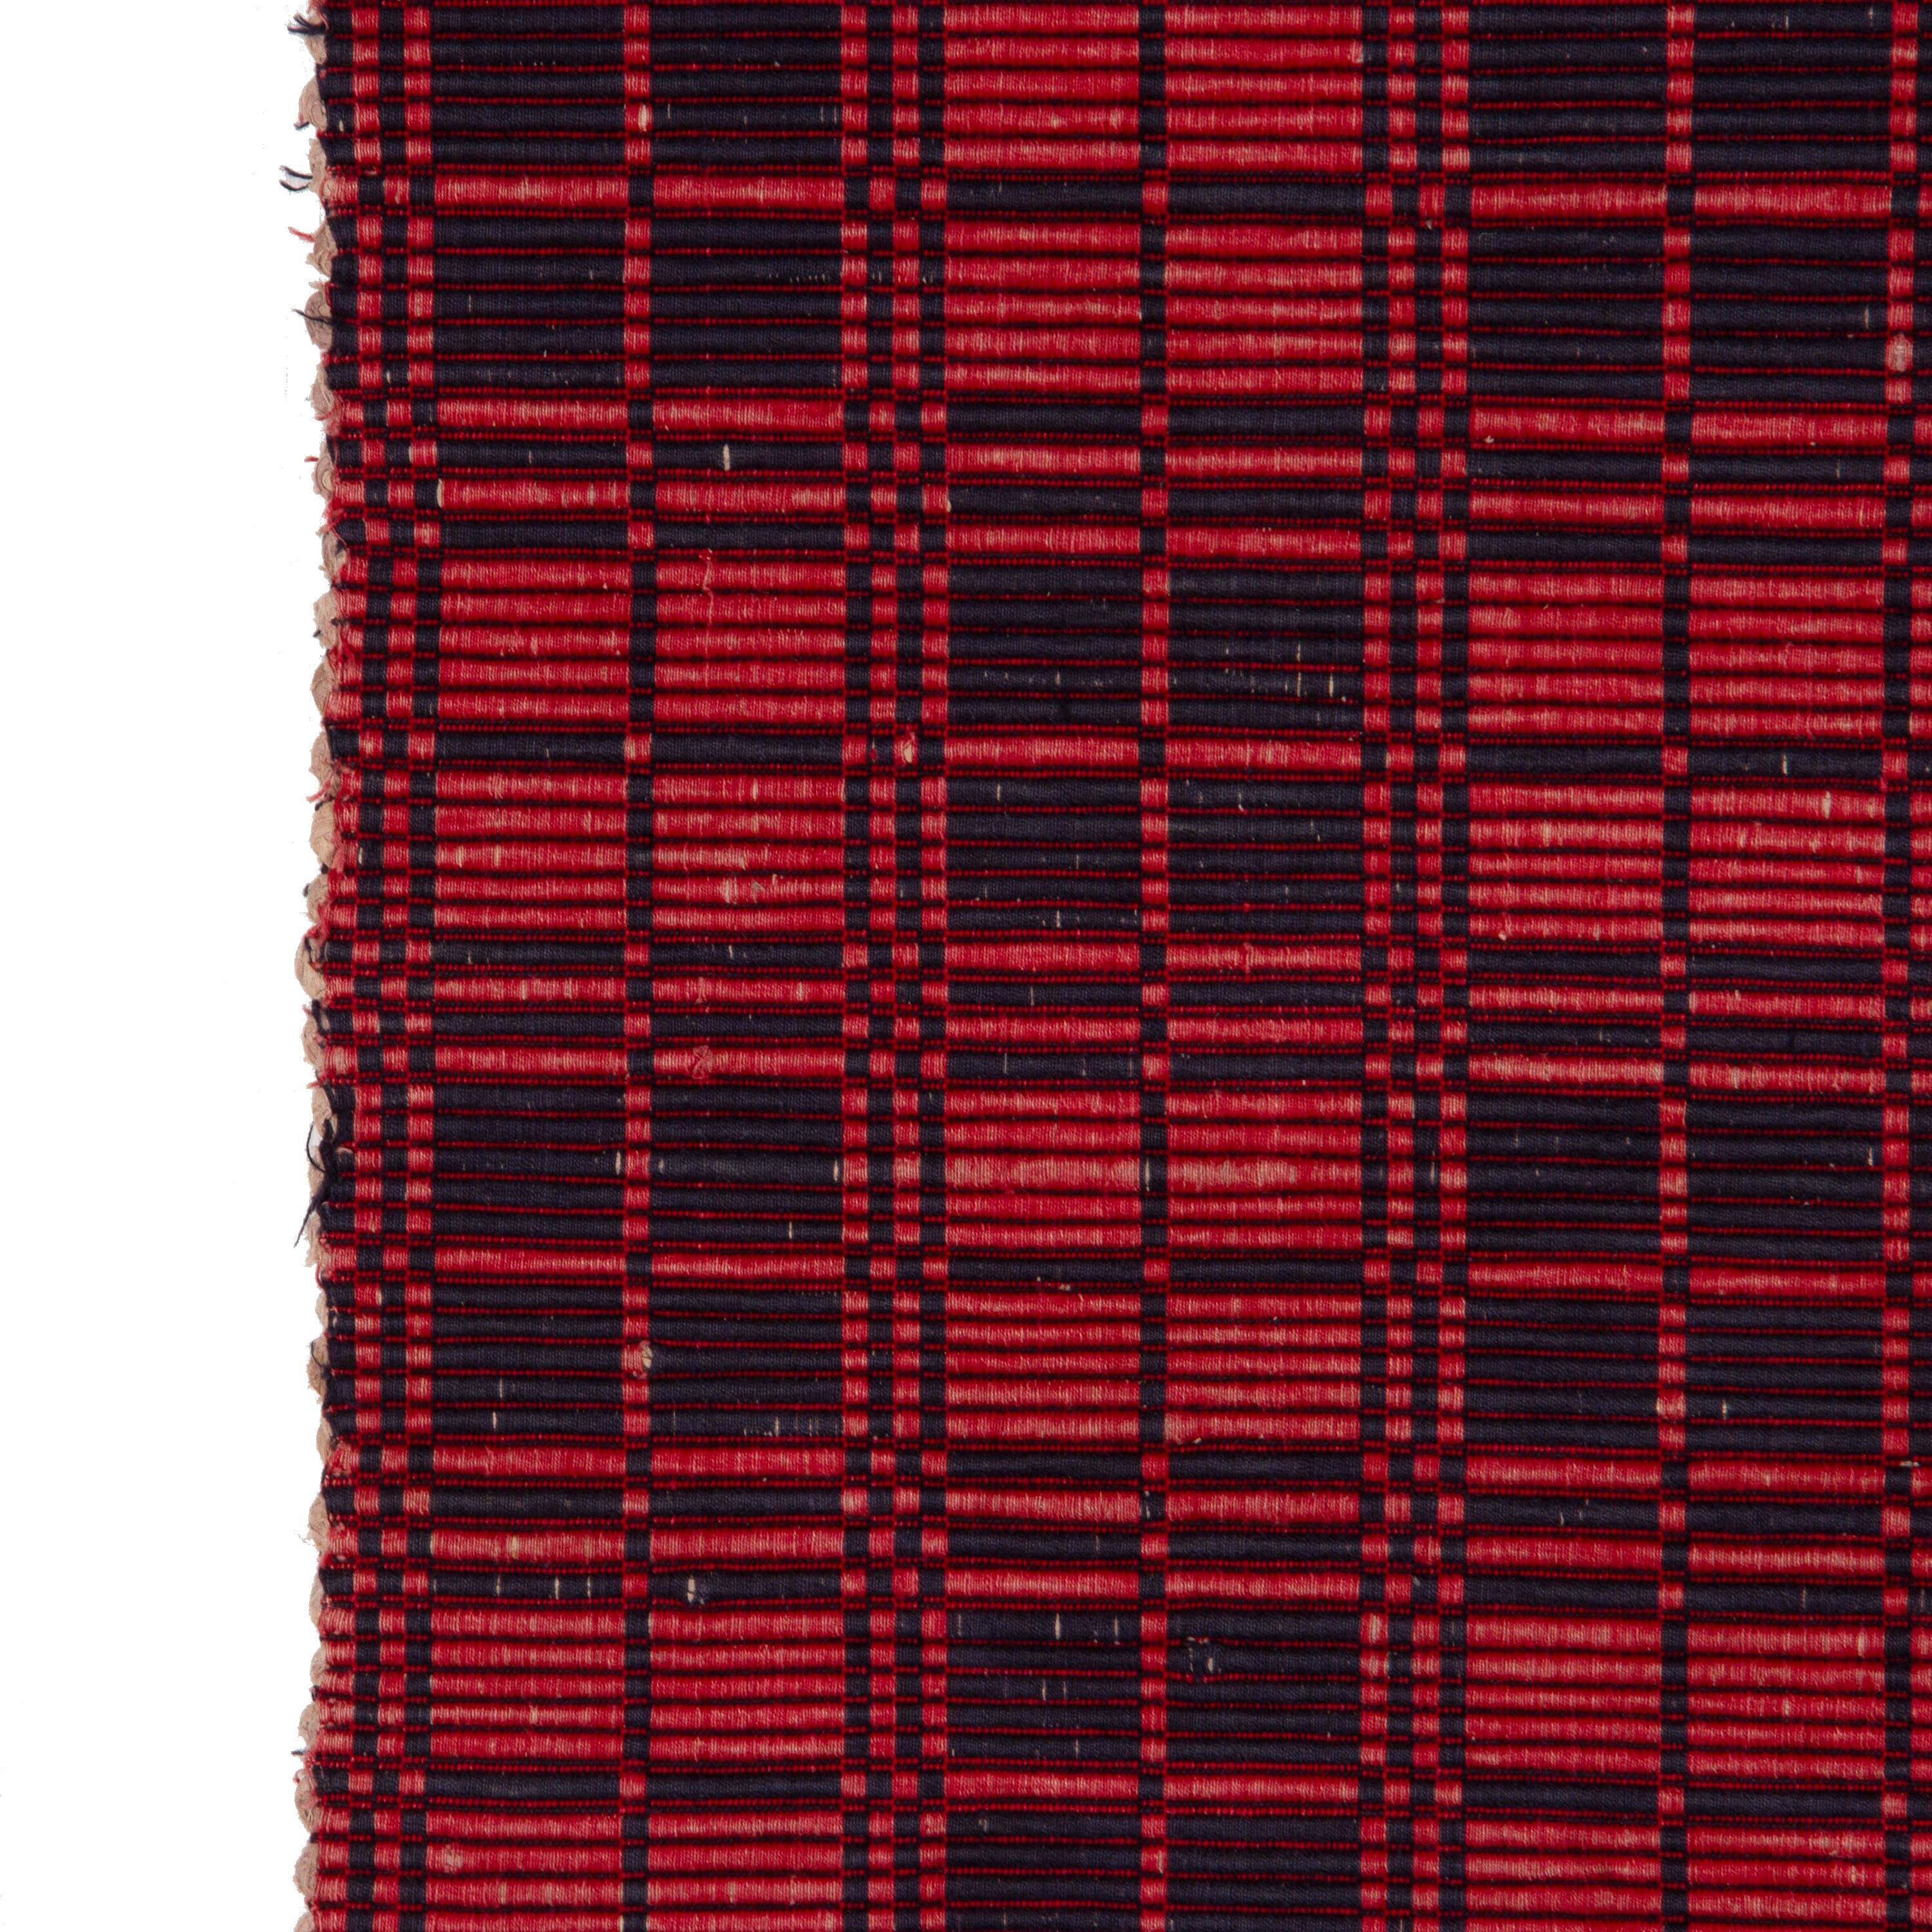 Swedish handwoven rip rug, 1940-50.
This rug has a long thin form, ideal for use as a runner. It features a dense geometric design in attractive shades of red and navy.